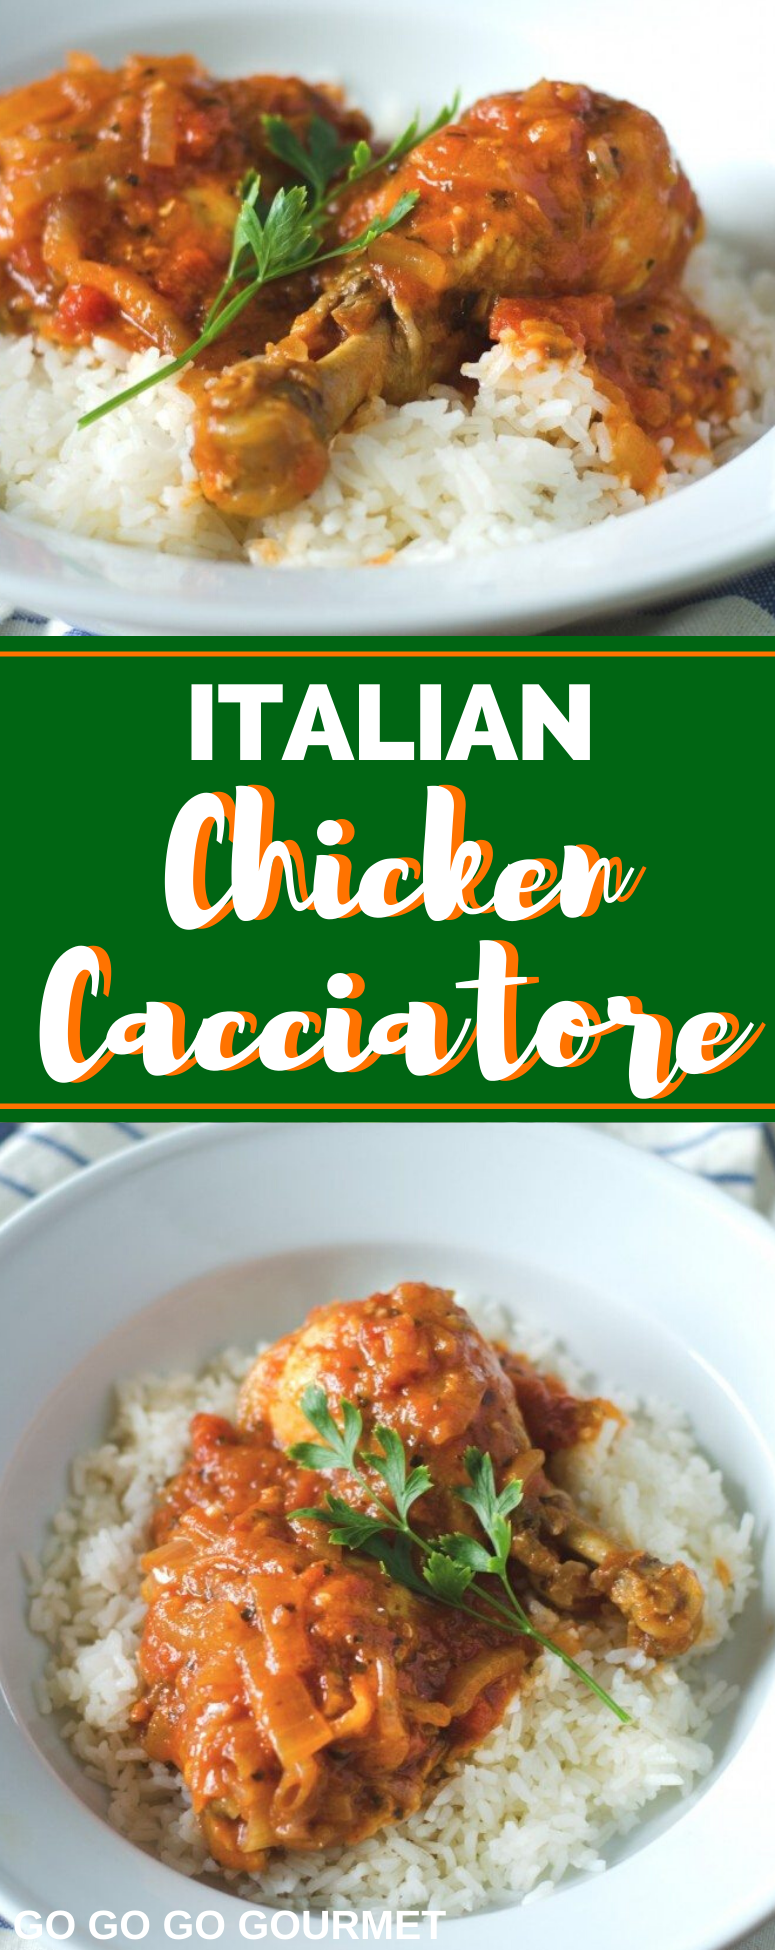 EASY Chicken Cacciatore Recipe - Simple Ingredients, Quick to Make!